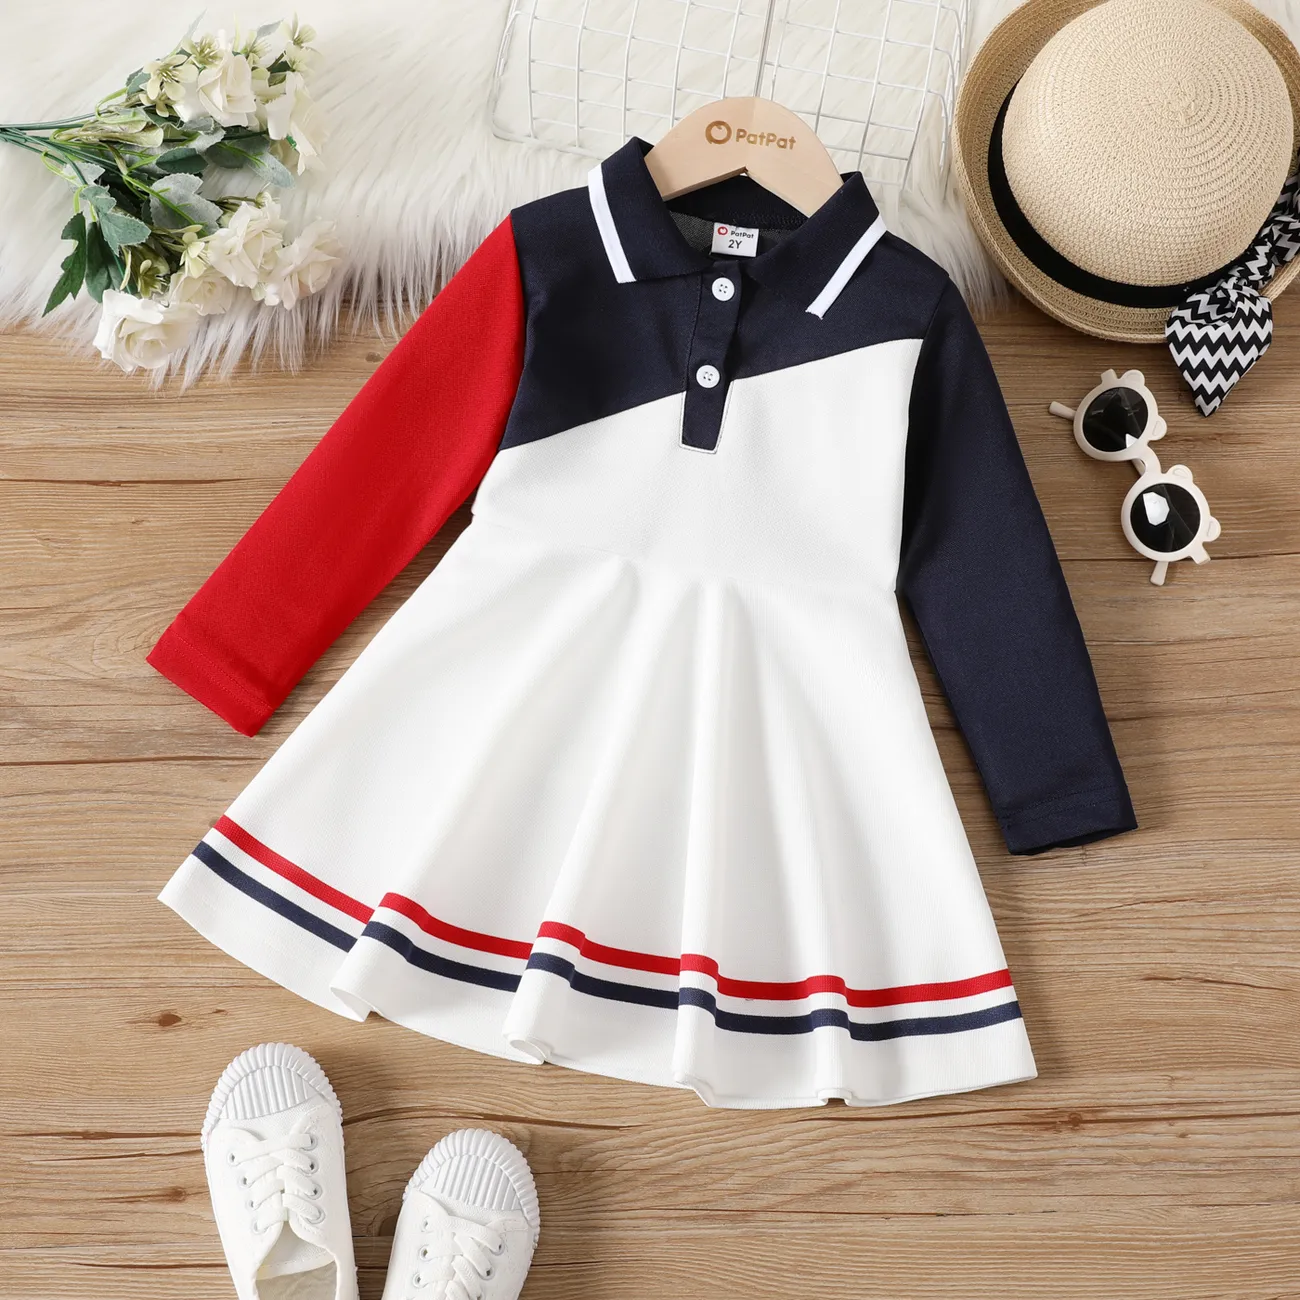 Preppy Girl Outfit Long Sleeve, Preppy Fashion Outfits